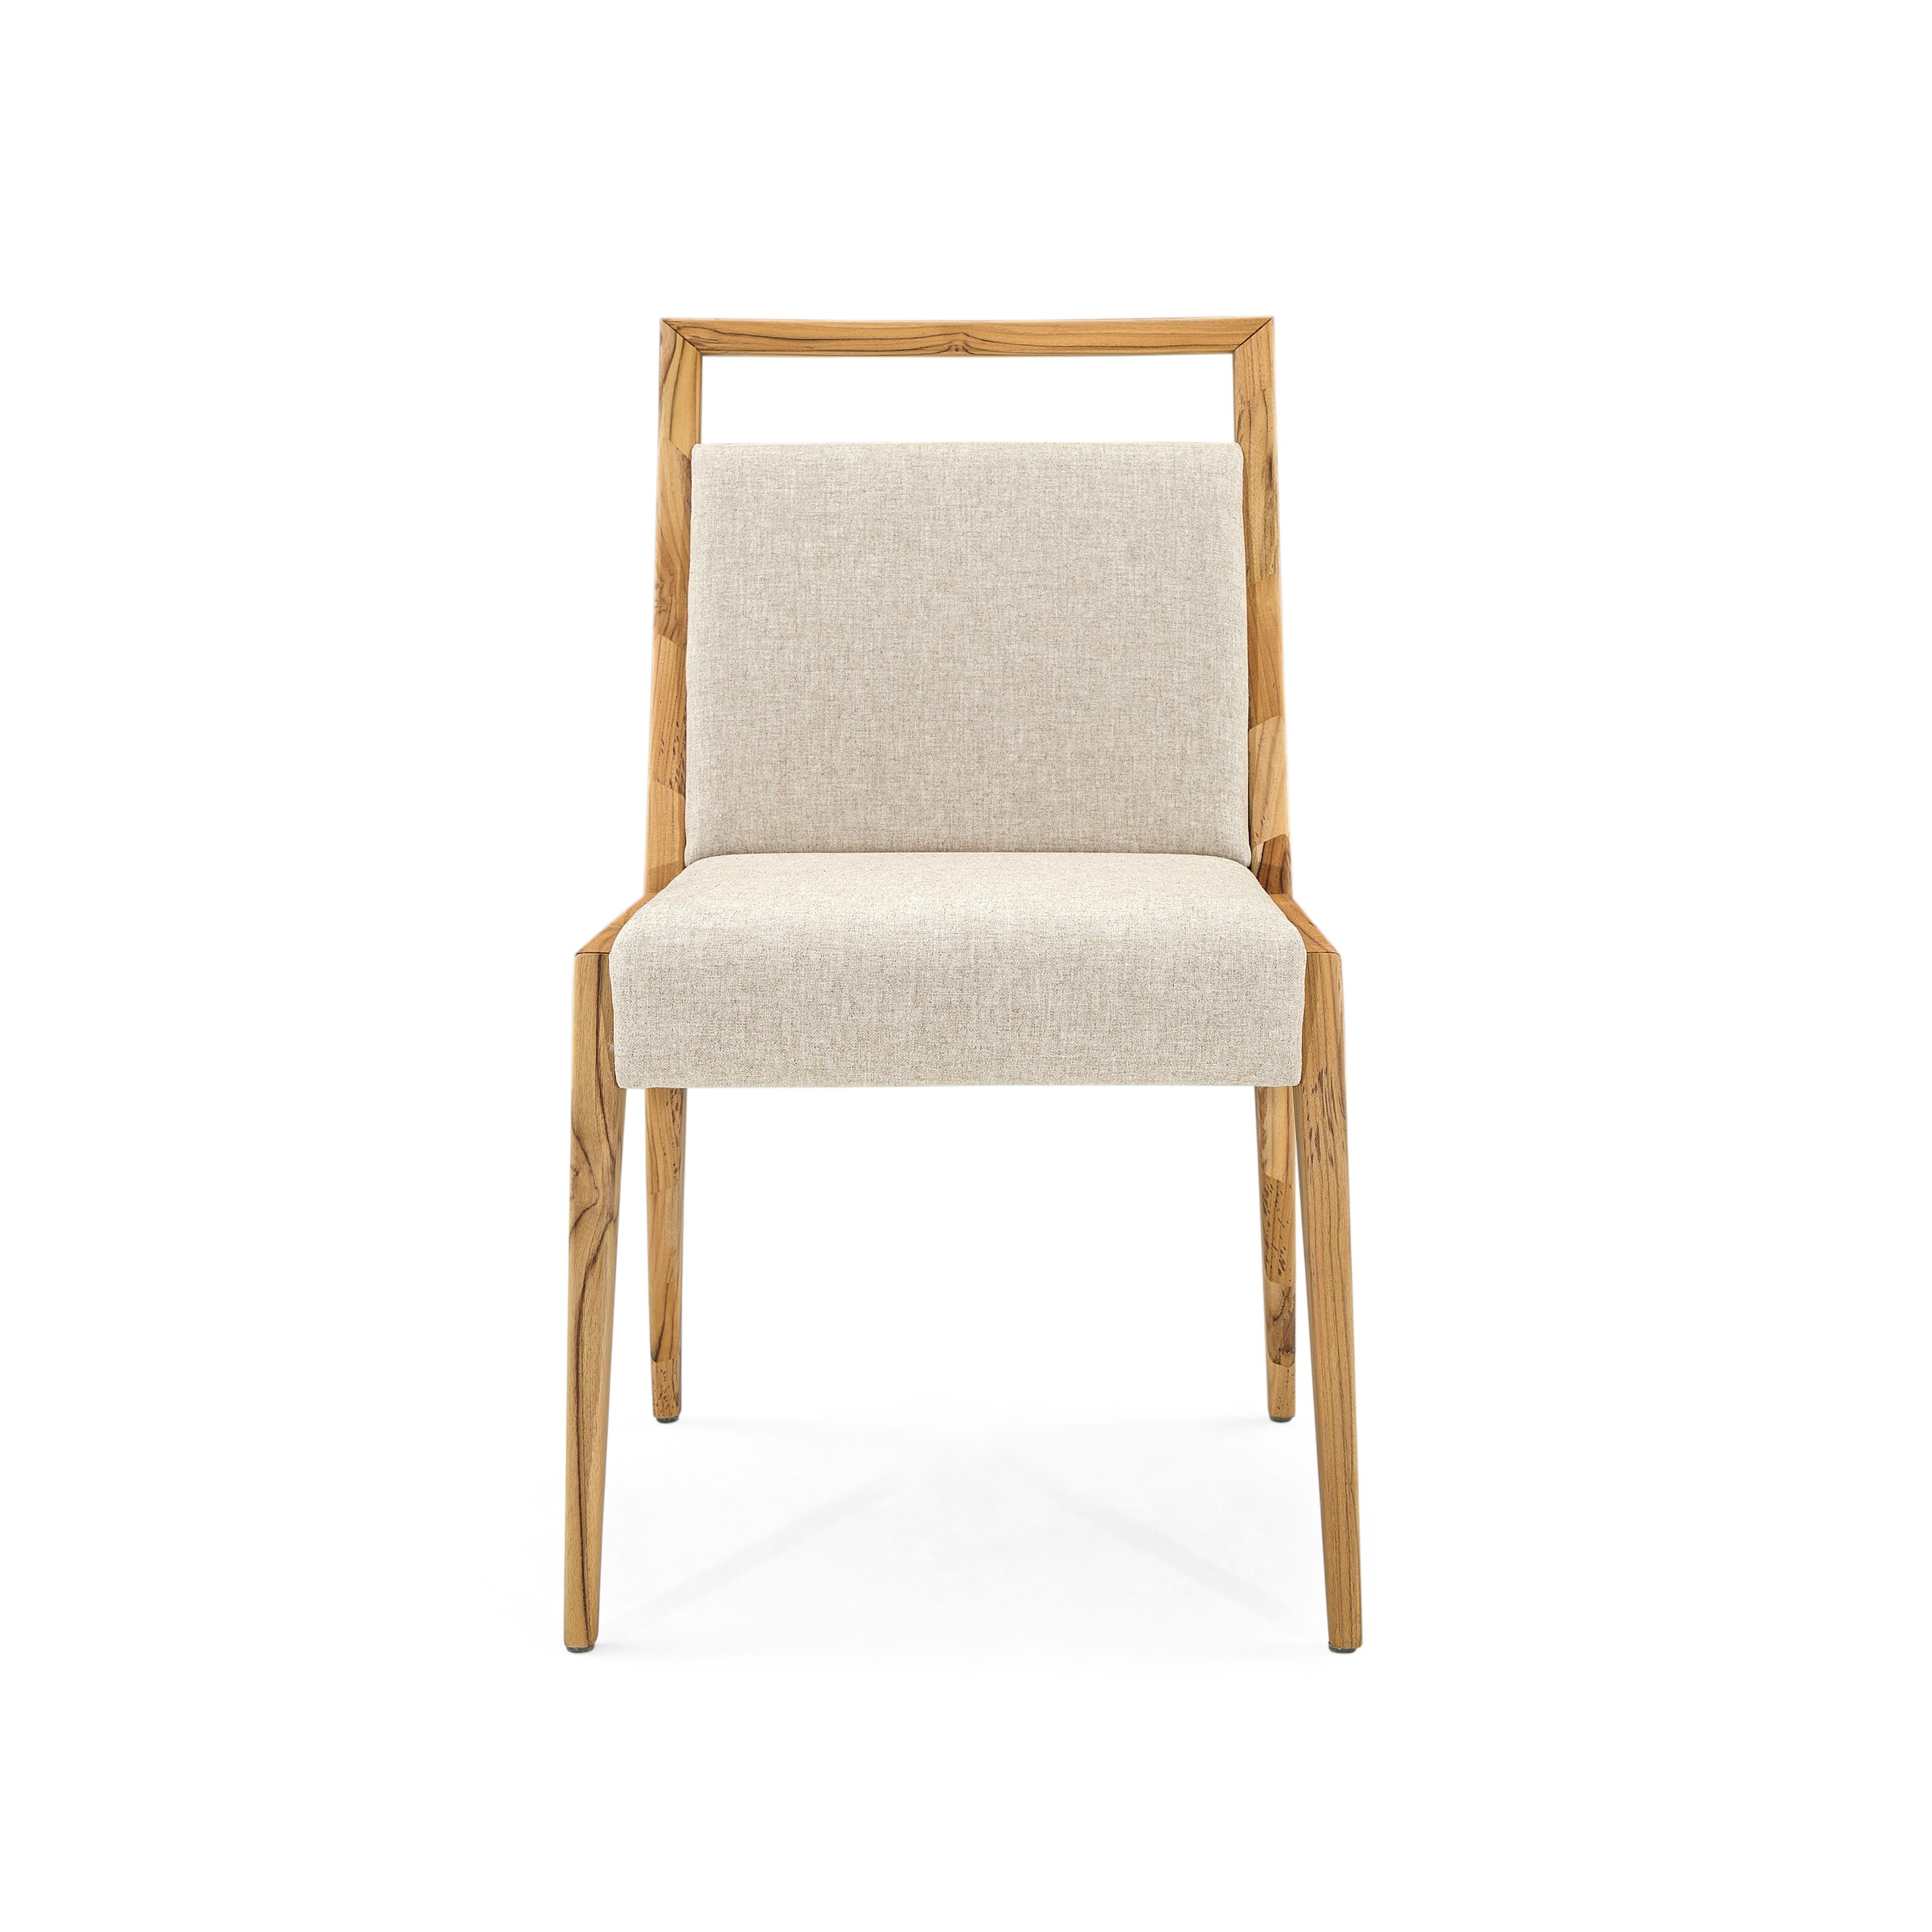 Sotto Dining Chair with a Teak Wood Finish and Beige Fabric, set of 2 For Sale 1